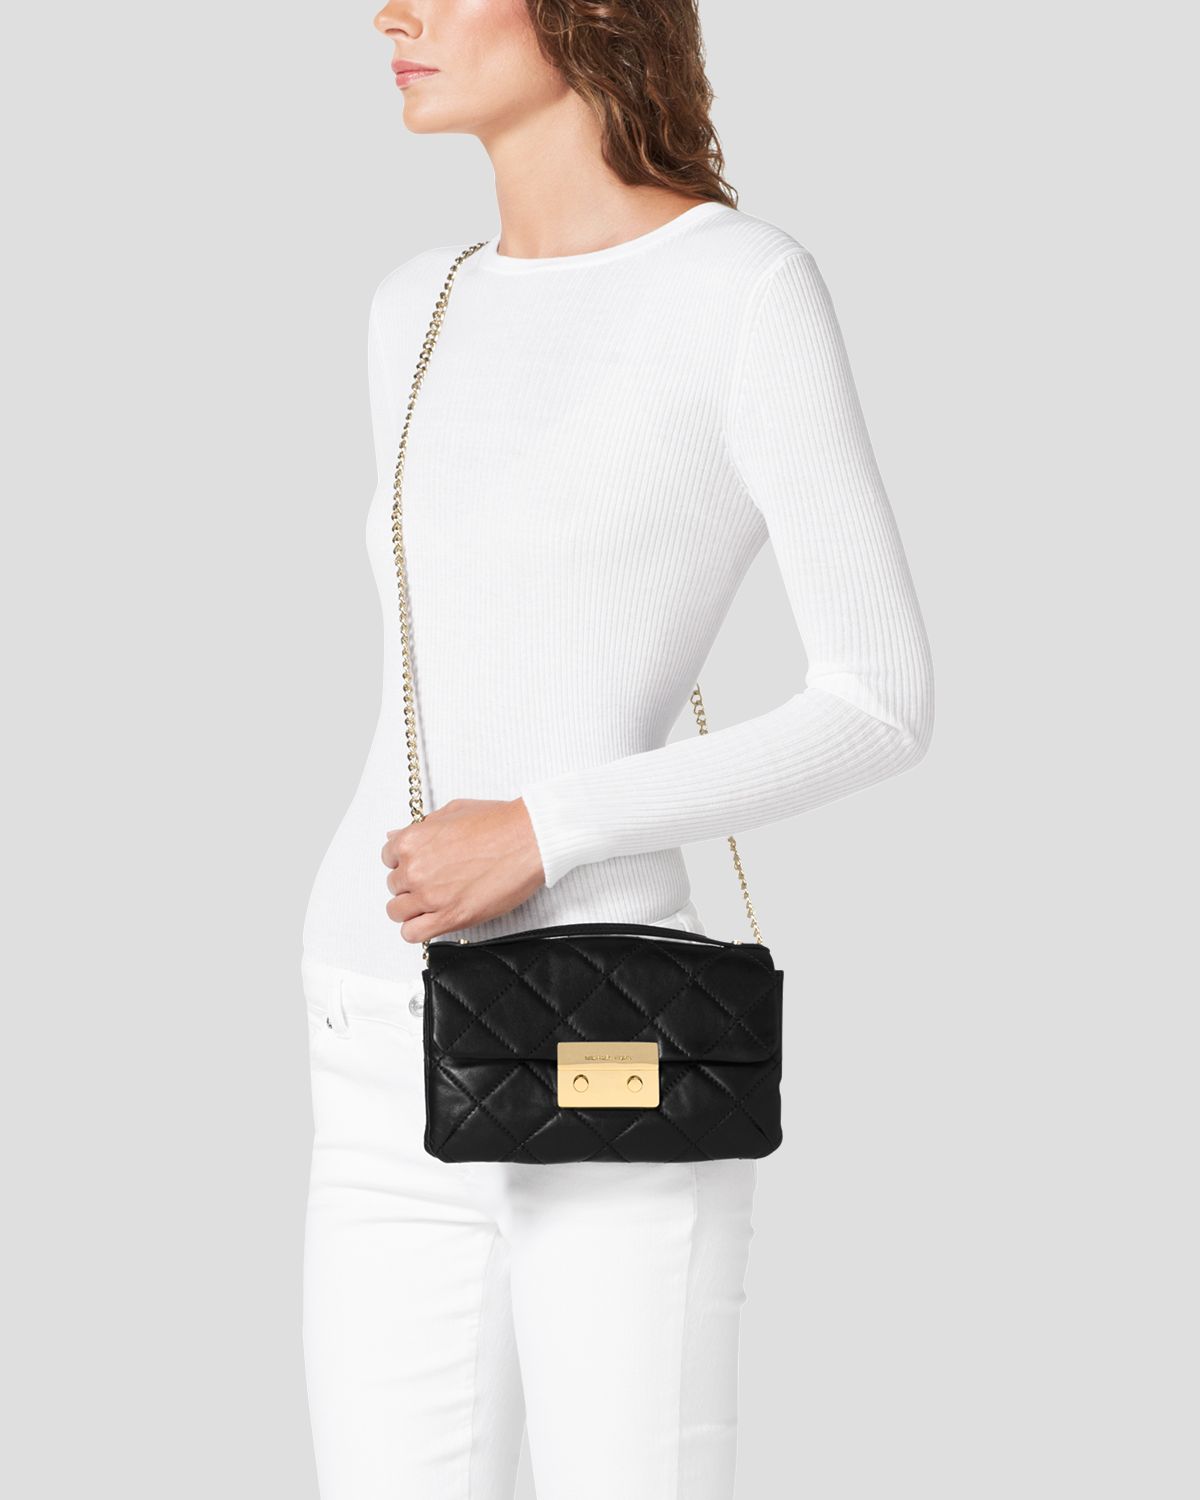 Lyst - Michael Michael Kors Shoulder Bag Sloan Small Quilted in Black